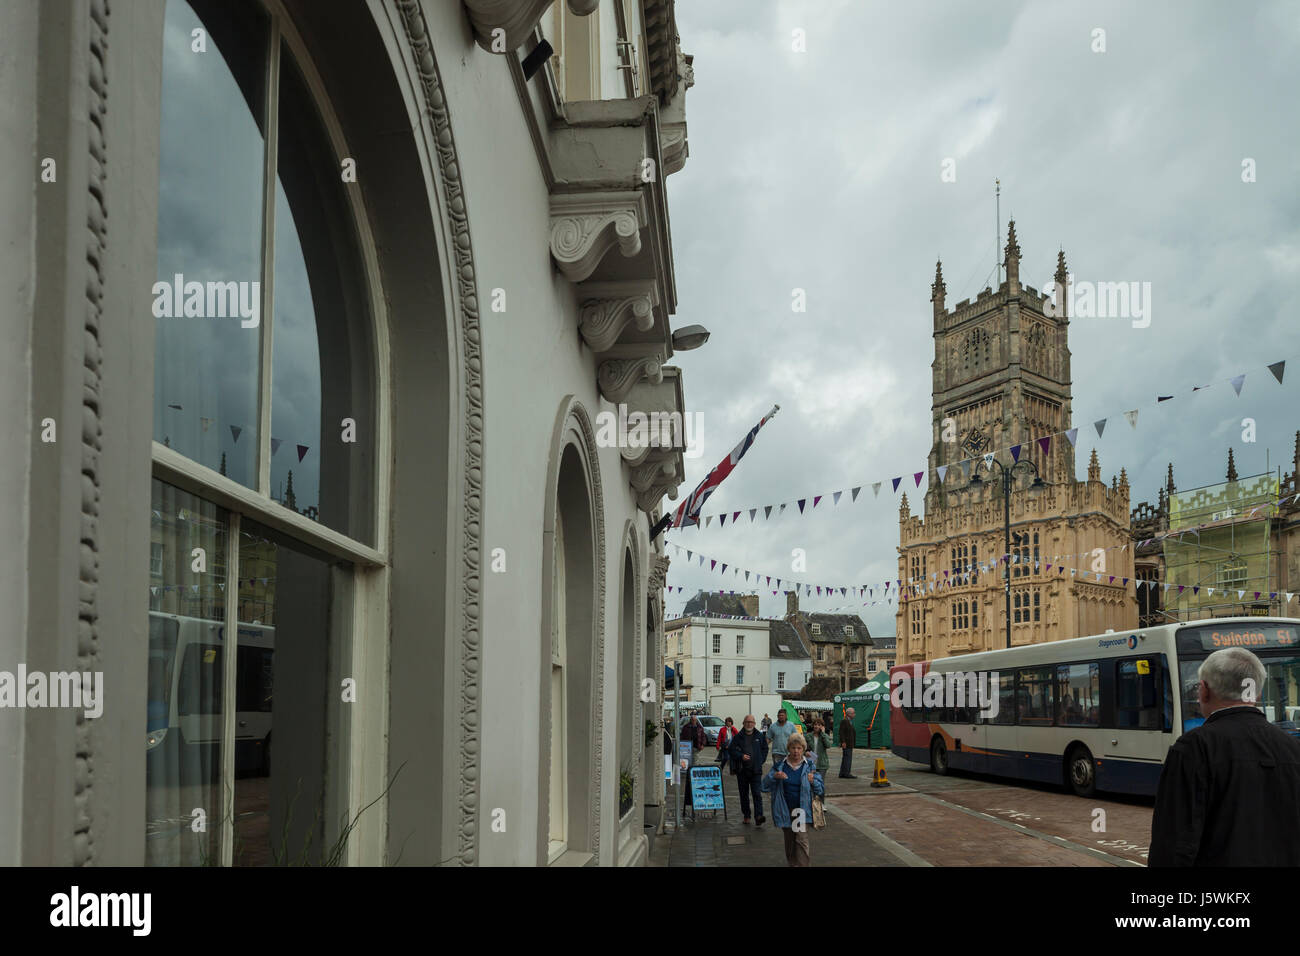 Stormy day in Cirencester, Gloucestershire, England. St John's church in the distance. Stock Photo